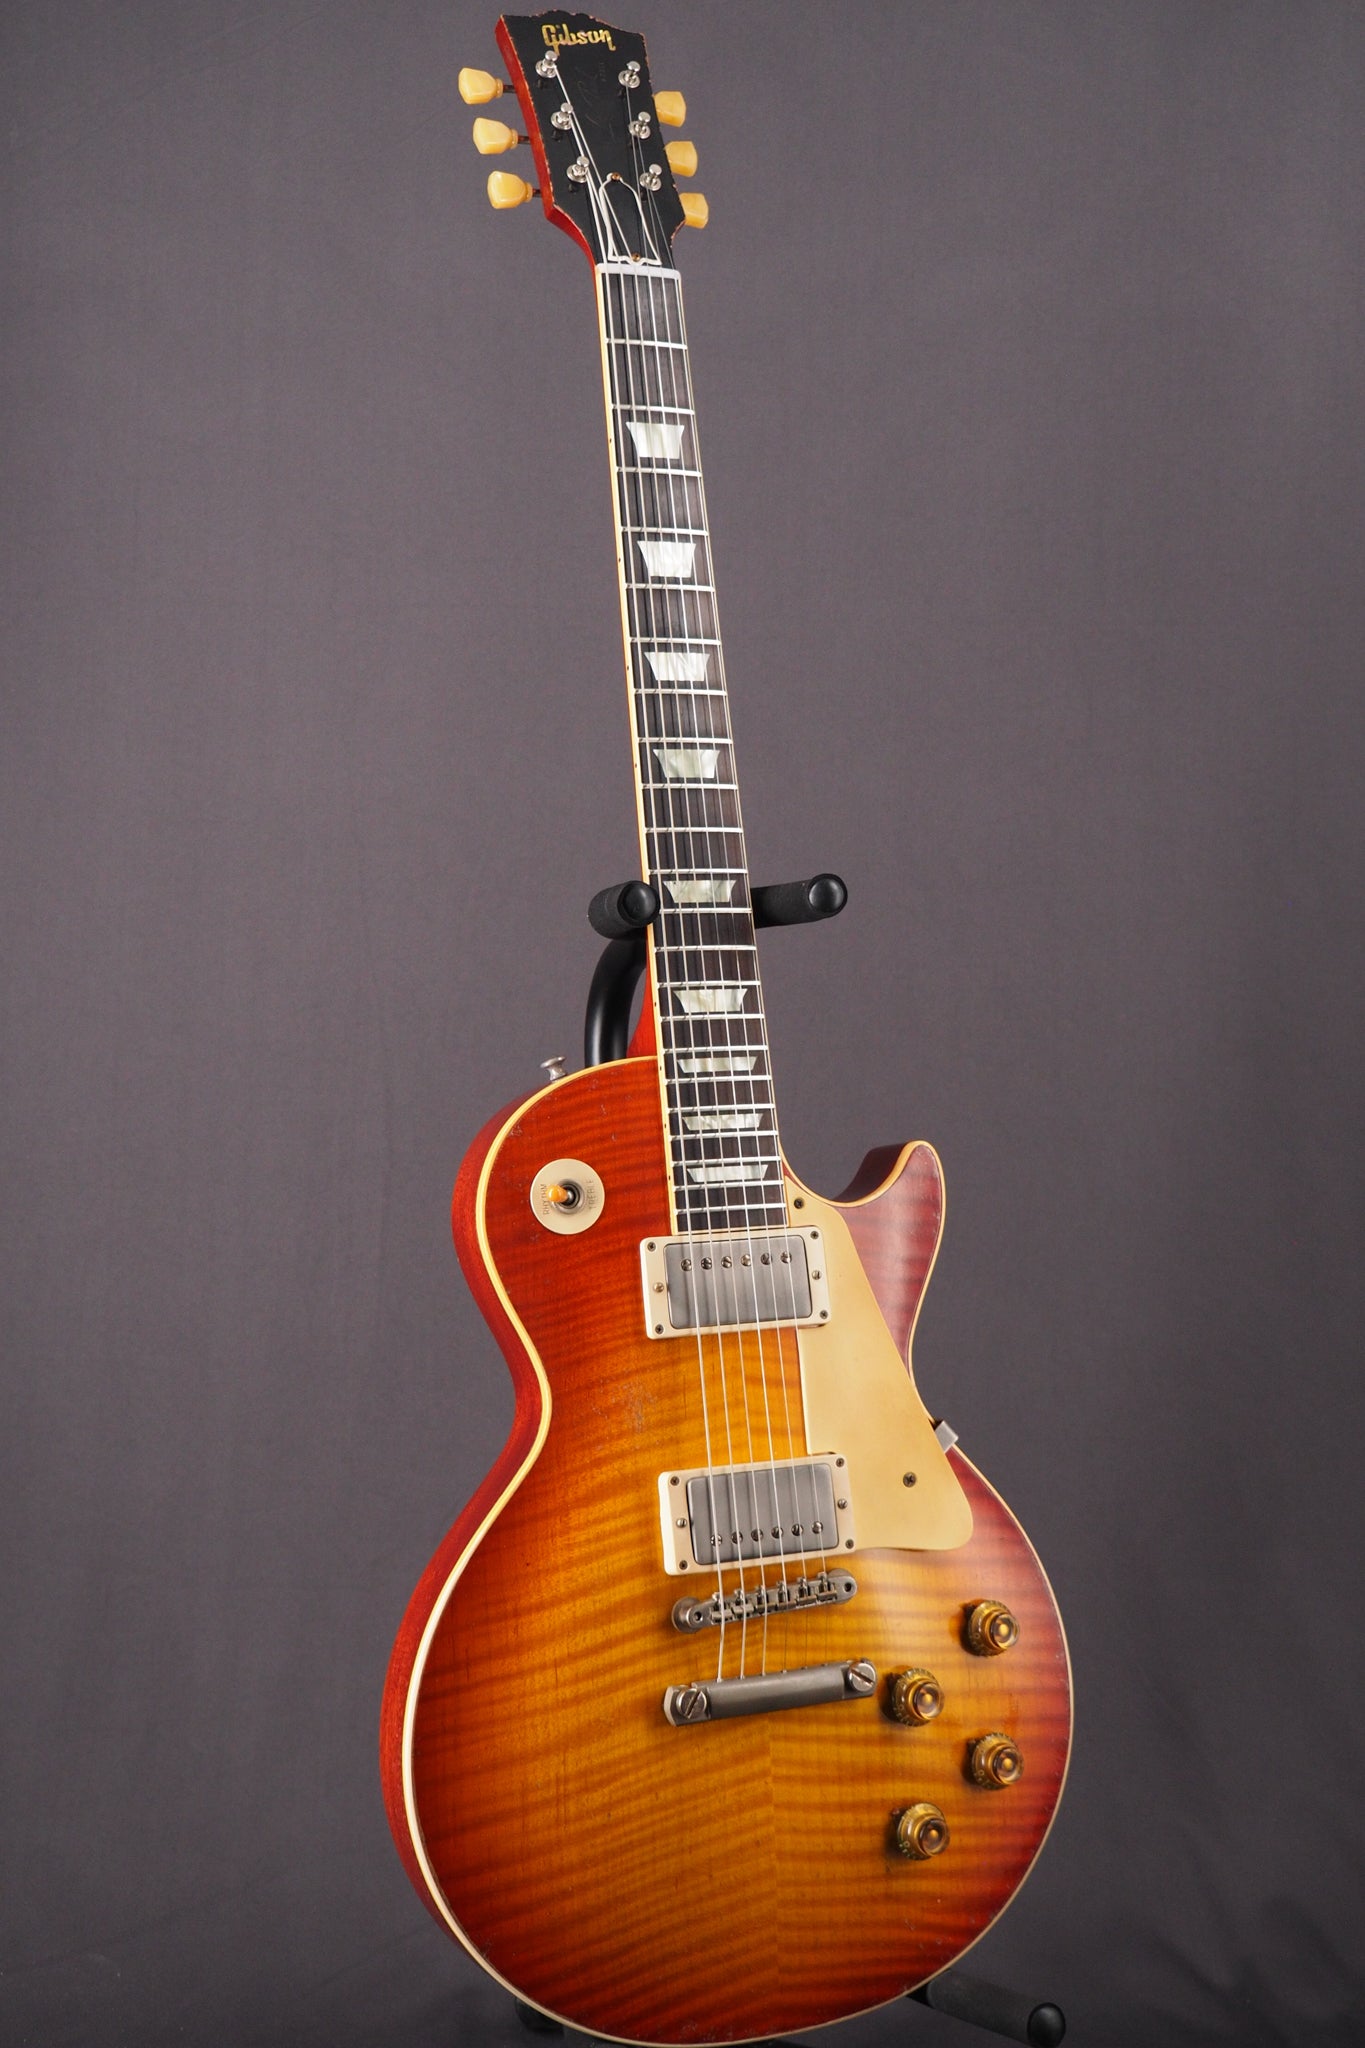 '59 Les Paul Reissue Limited Edition Brazilian Rosewood - Tom's Cherry